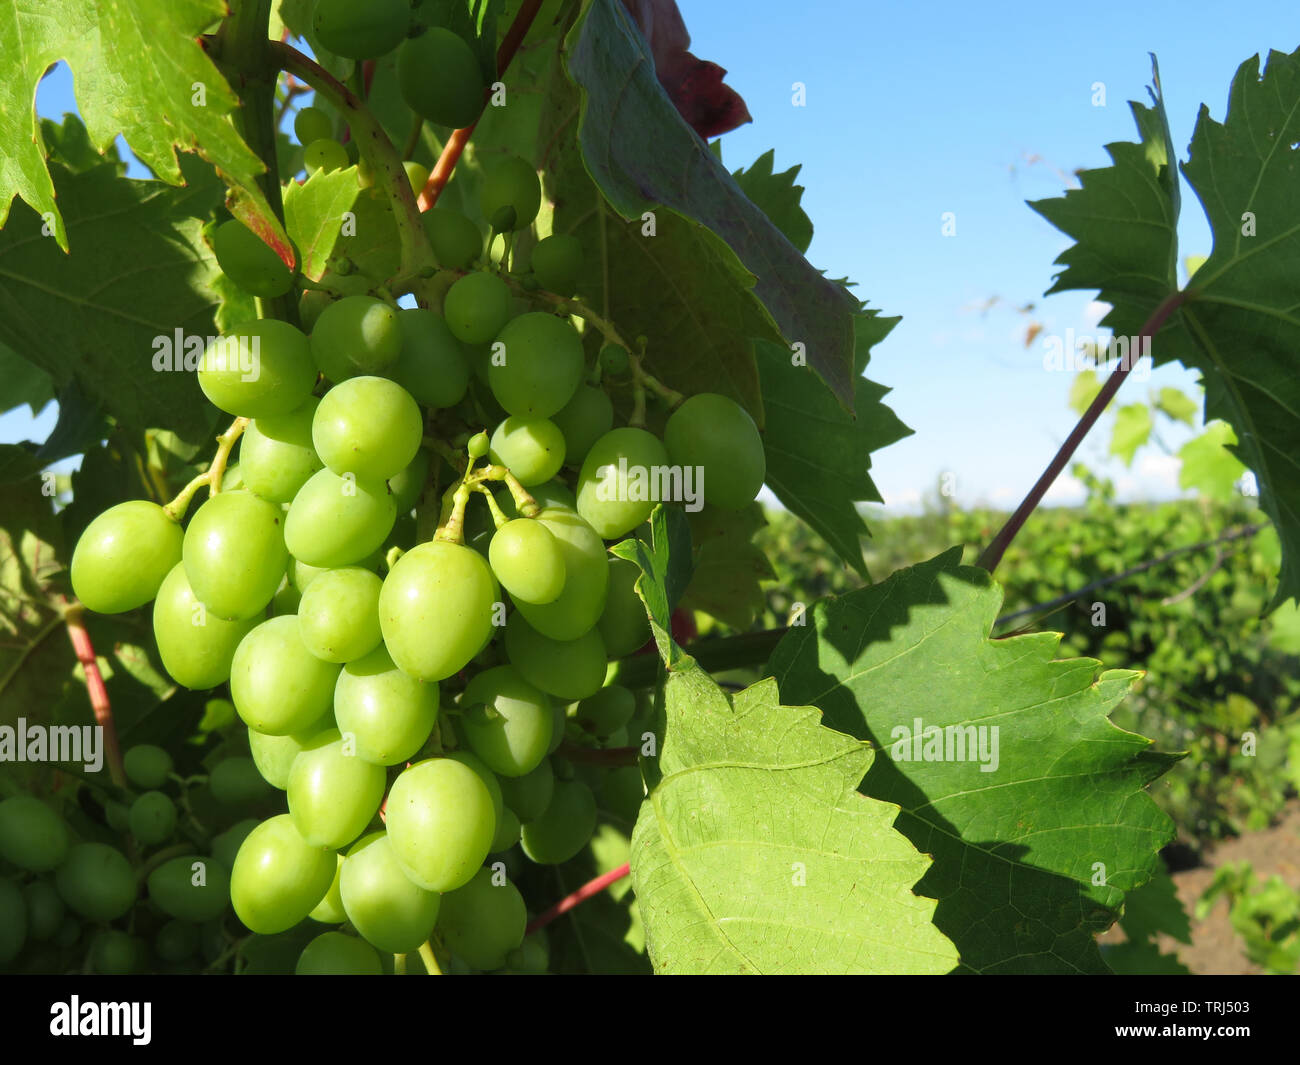 Vineyard in summer, green bunches of white grapes growing on blue sky background. Rural landscape with unripe grapevine, winemaking concept Stock Photo